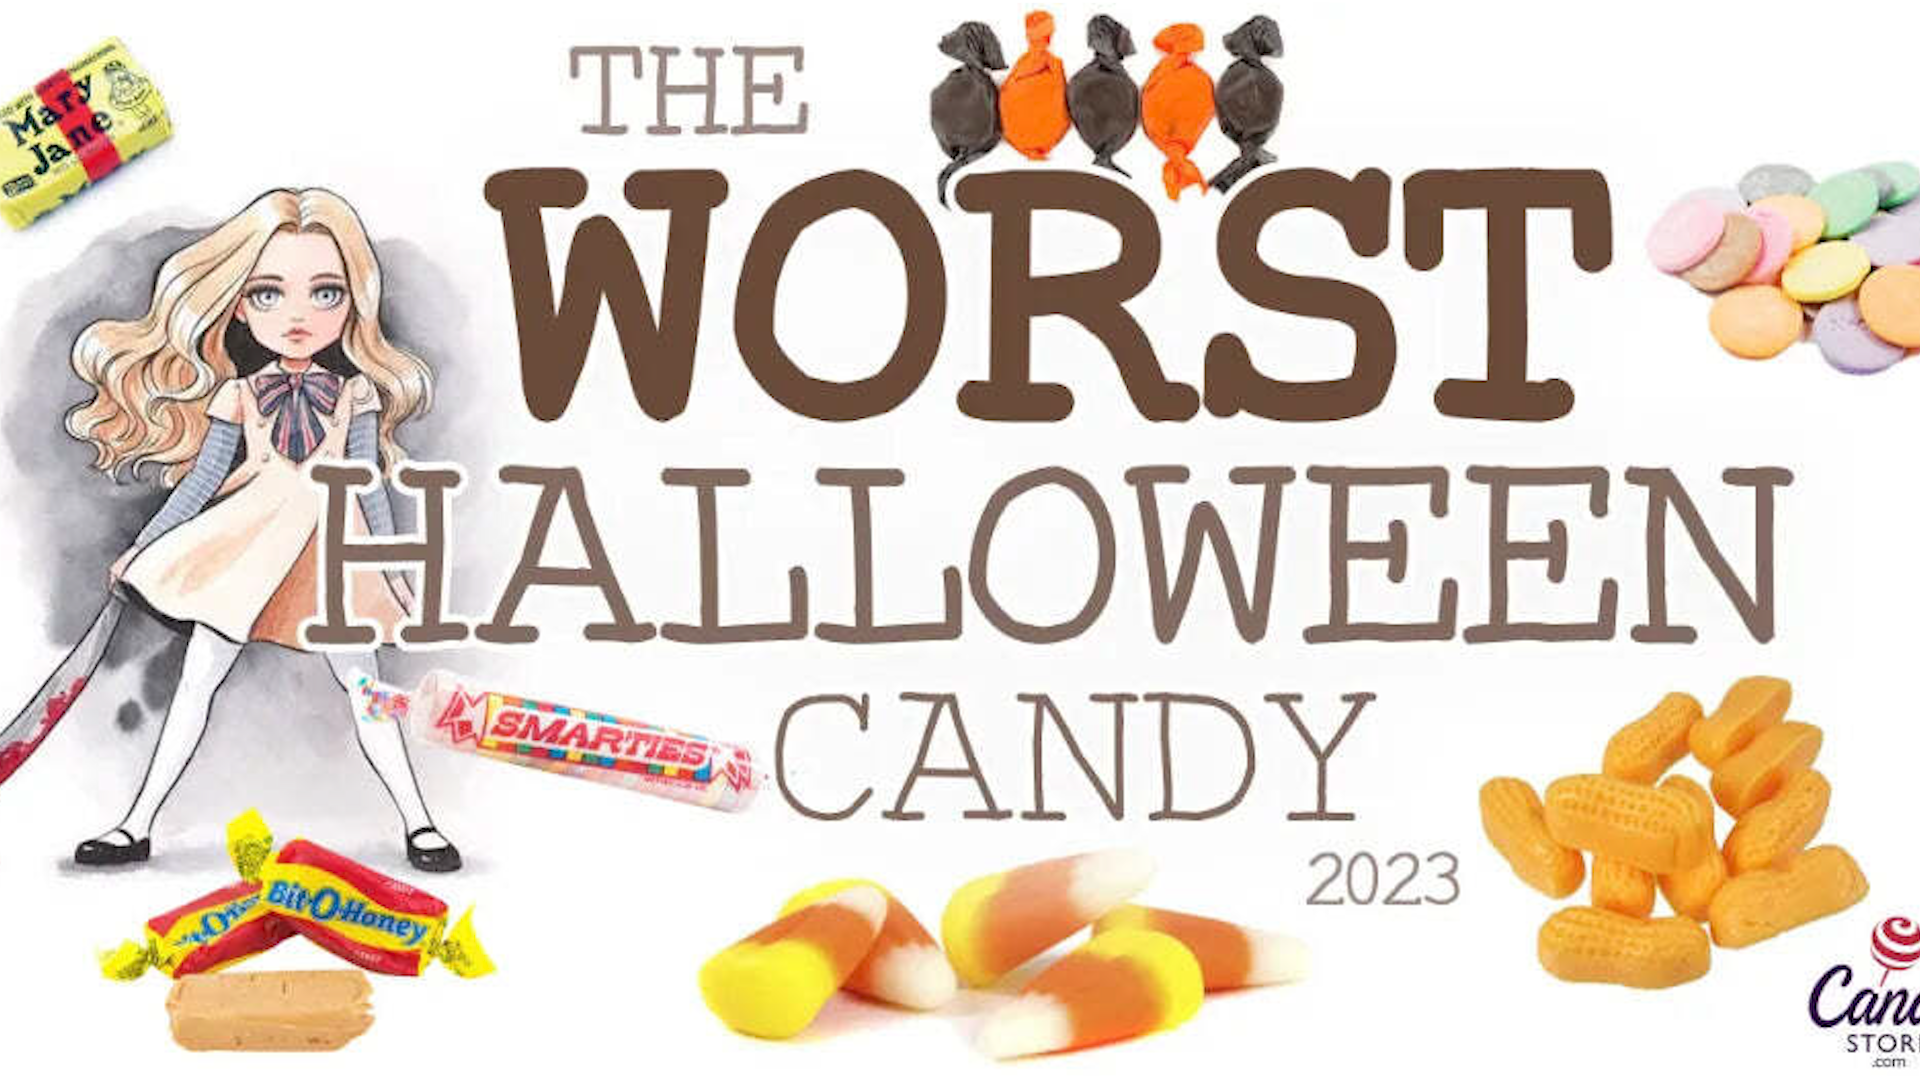 Candy Corn Actually Isn't the Worst Halloween Candy - 98.3 WCCQ